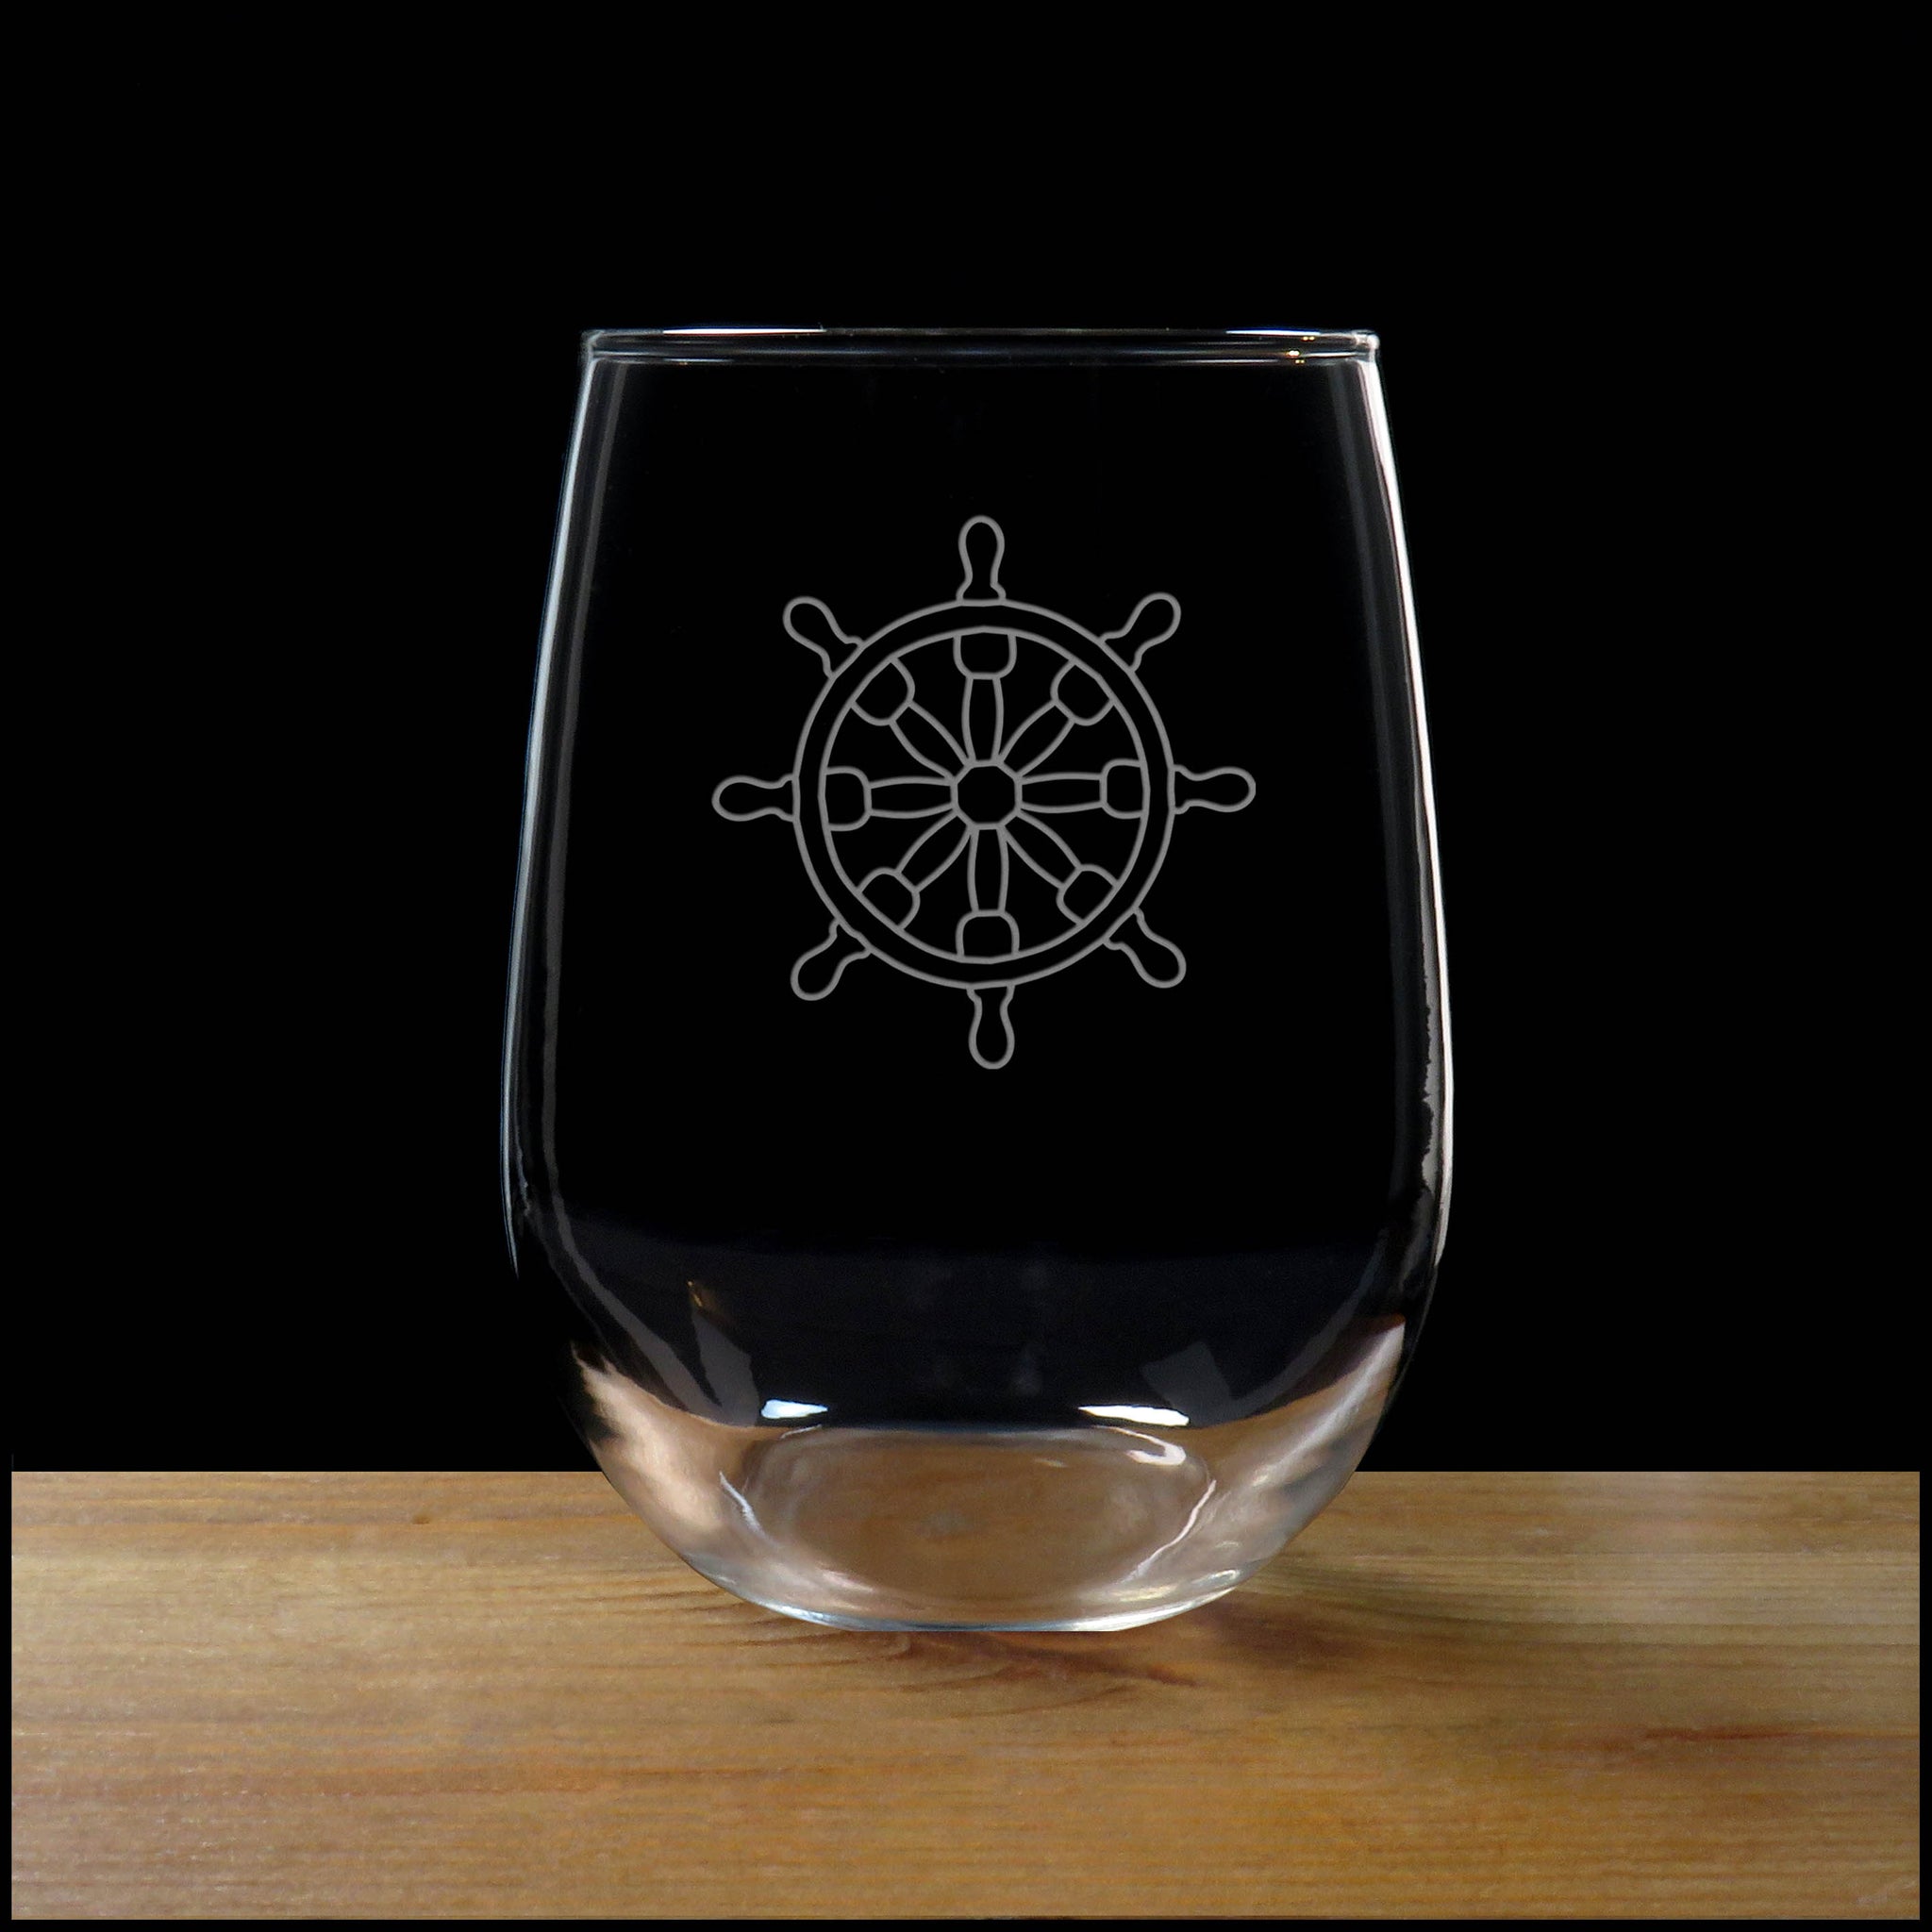 Ship's Wheel Stemless Wine Glass - Design 2 - Copyright Hues in Glass